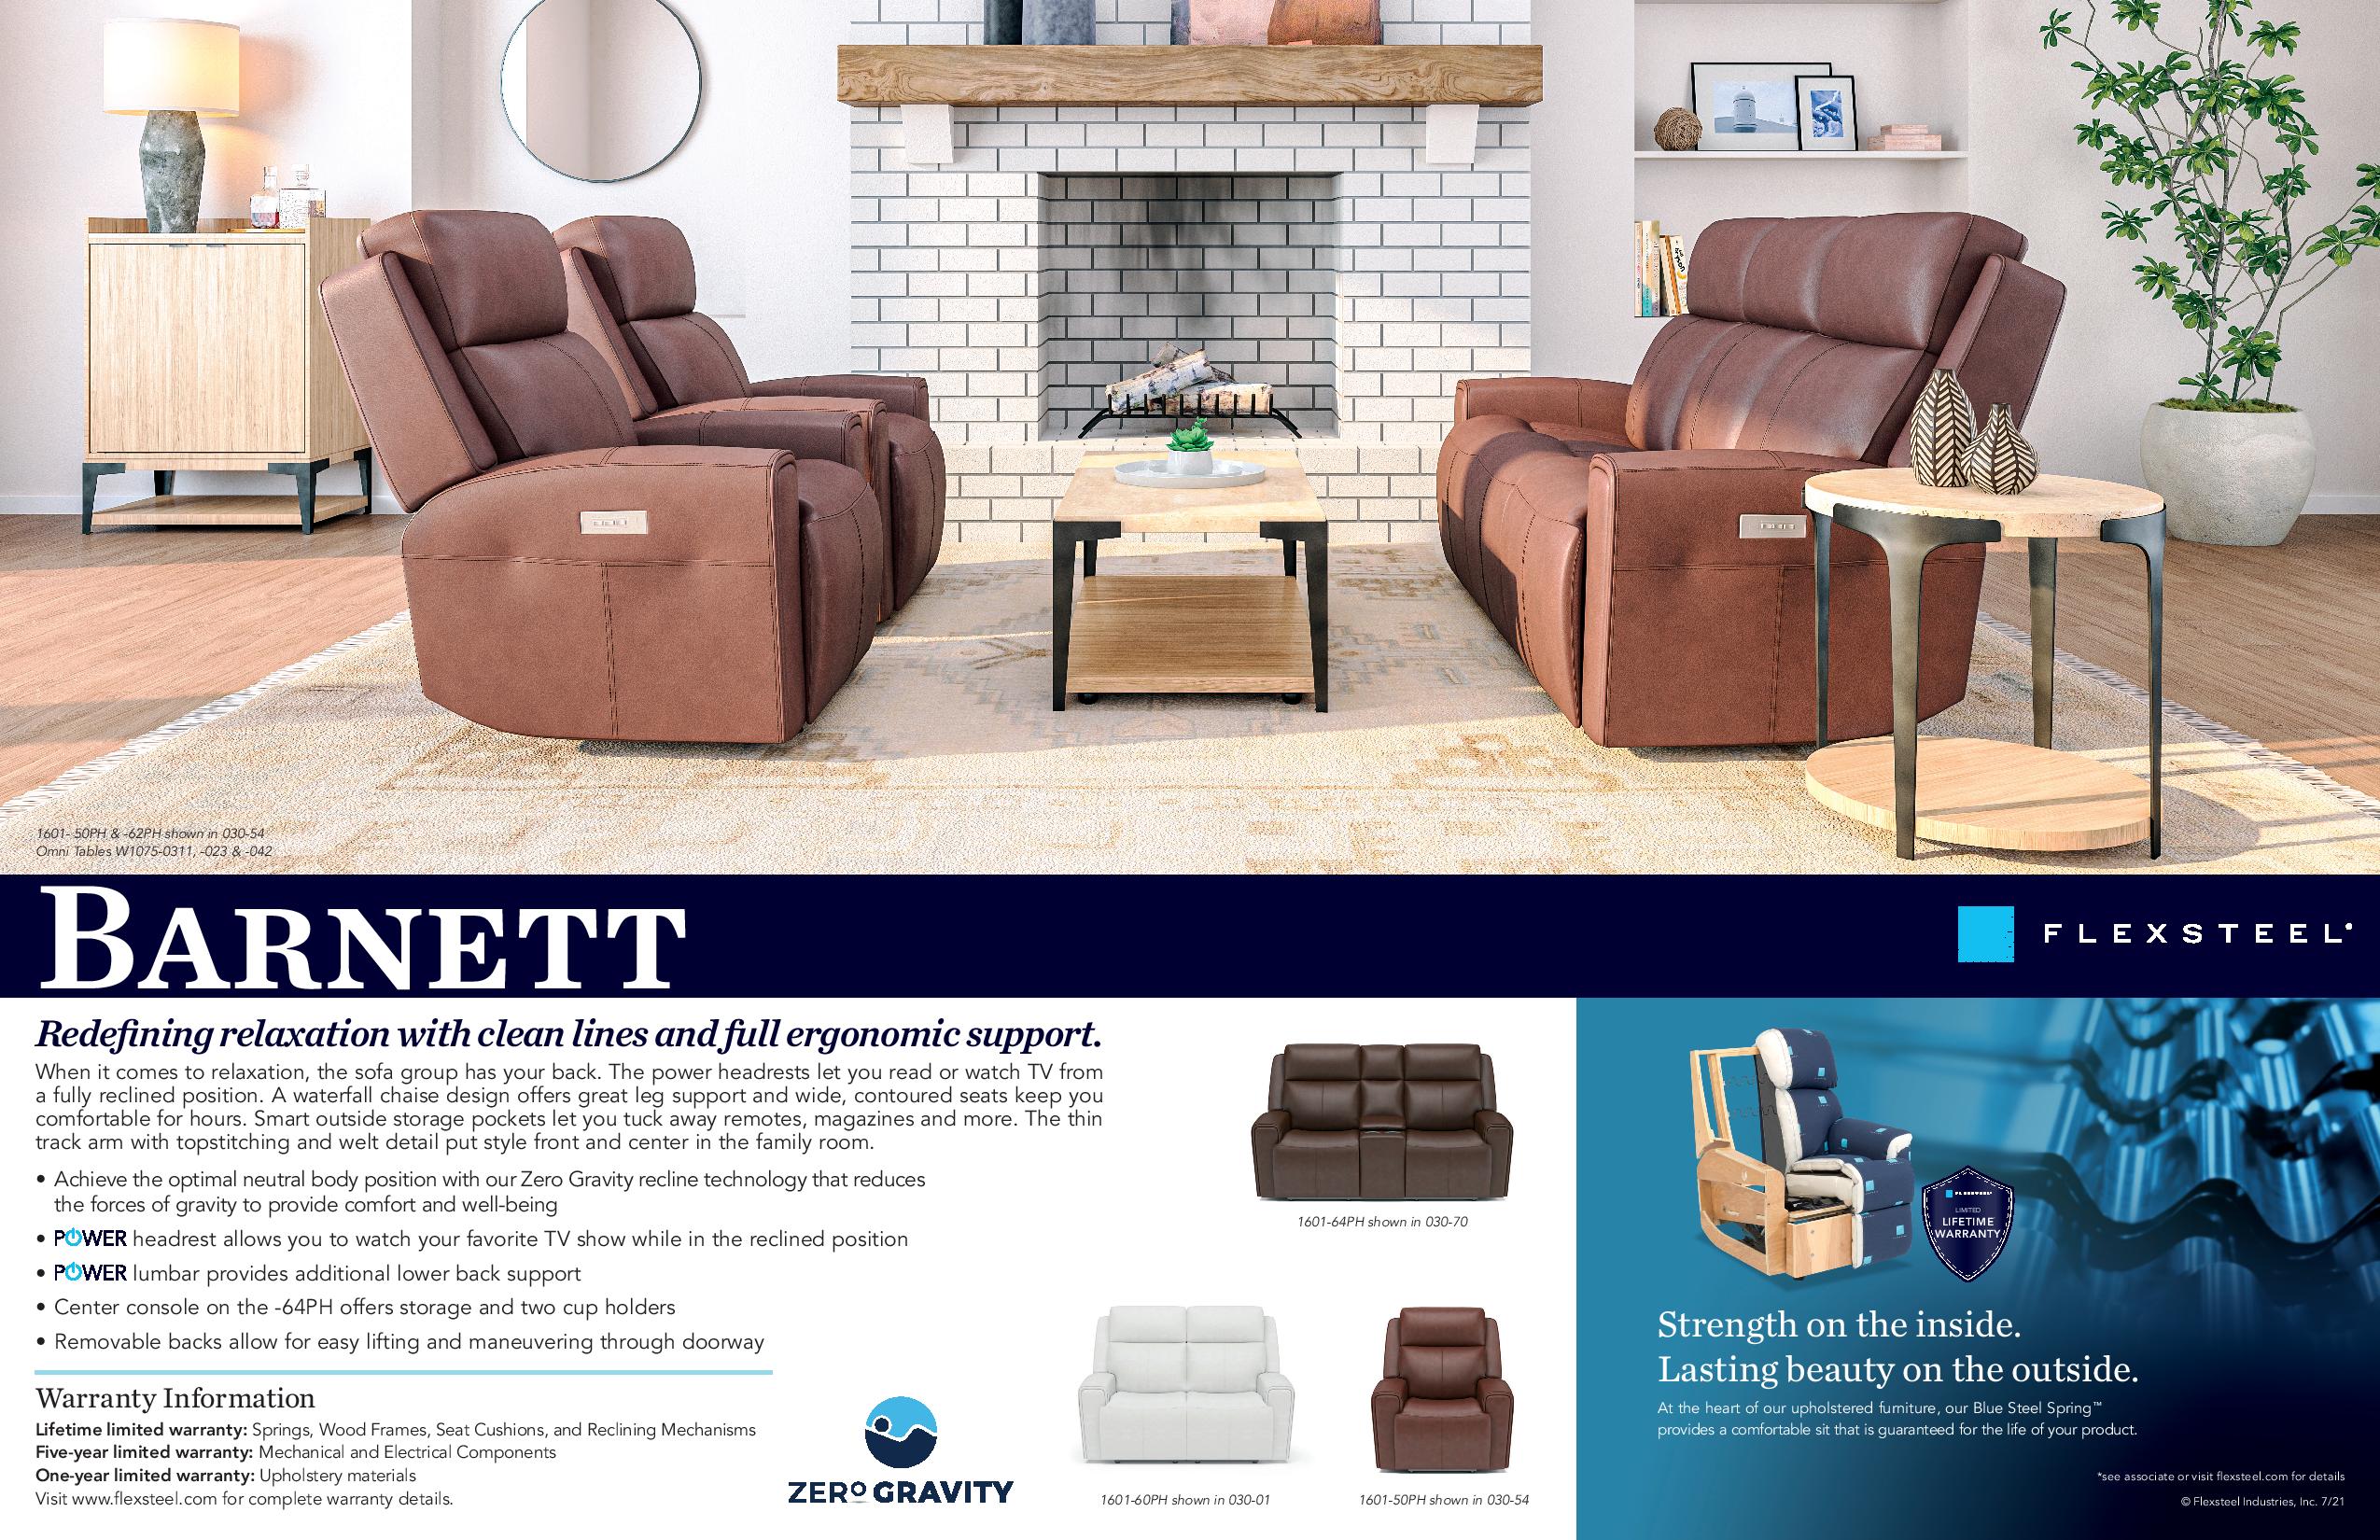 Finding The Right Flexsteel Sofa Is Easy